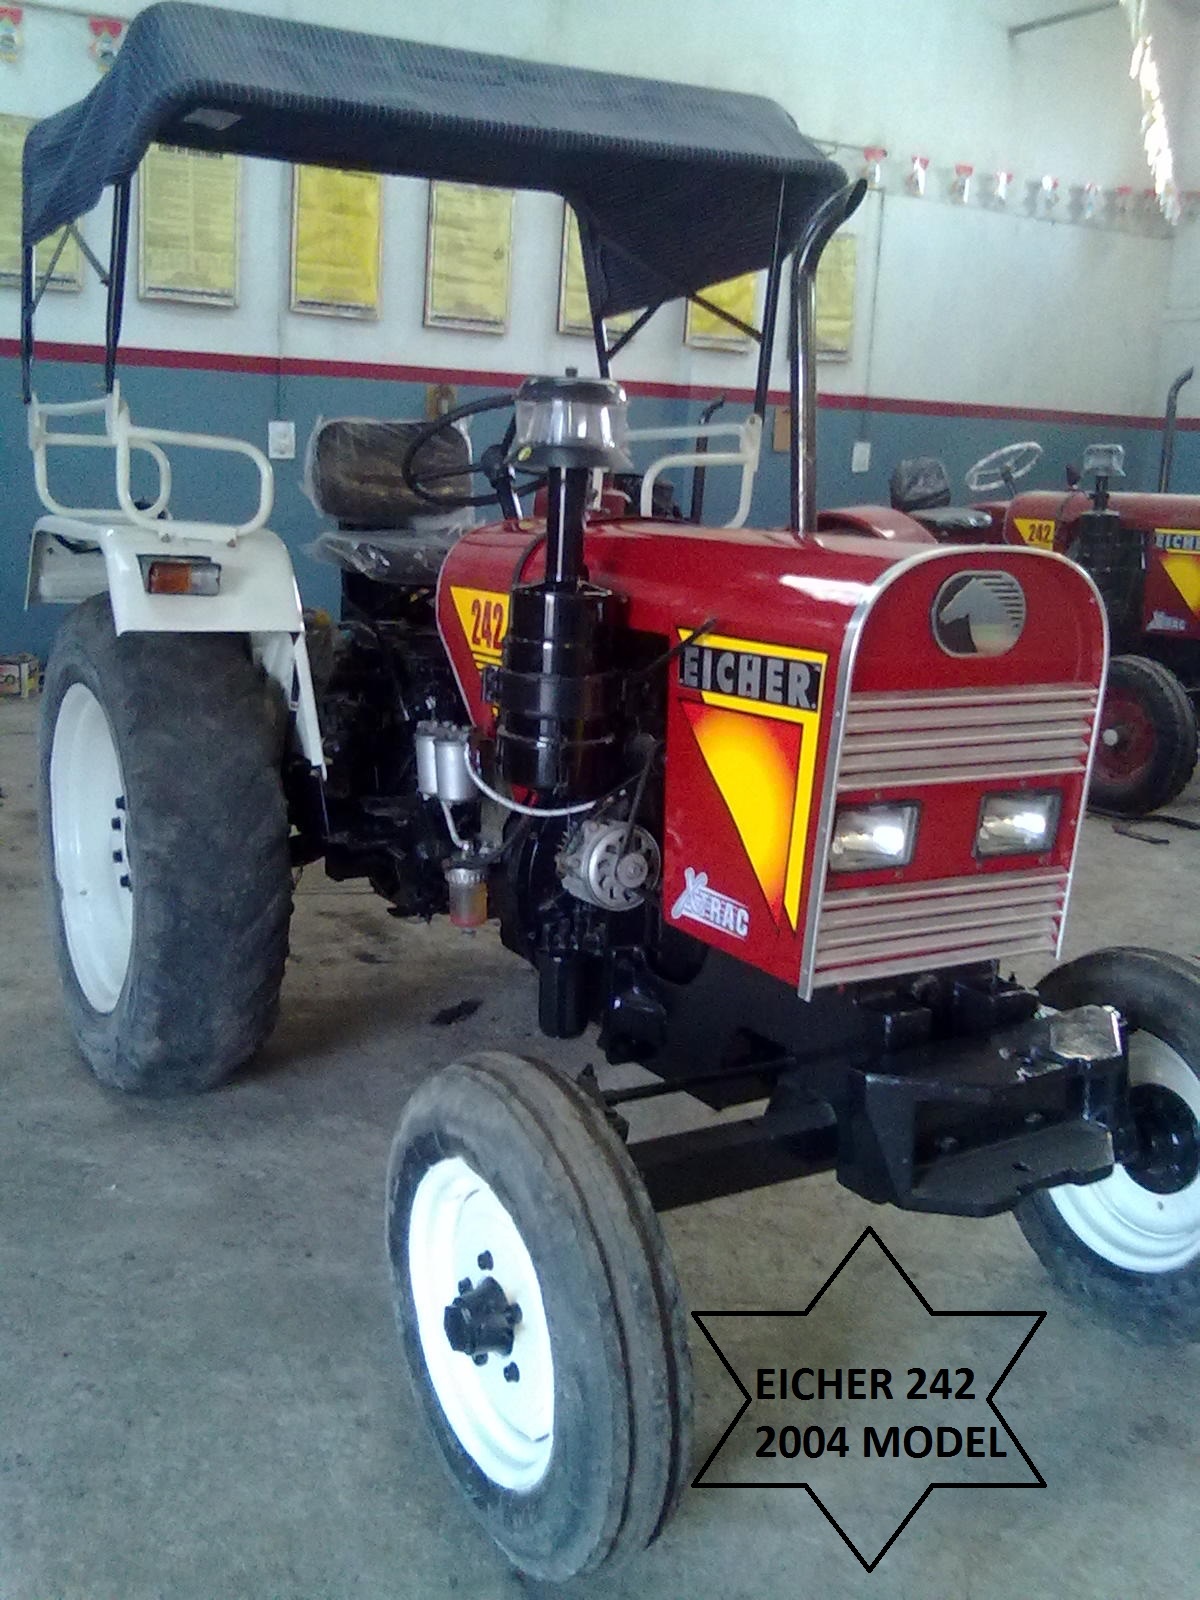 KISAN TRACTORS BASNA: eicher 242, contact - 09425211683, 09993324983